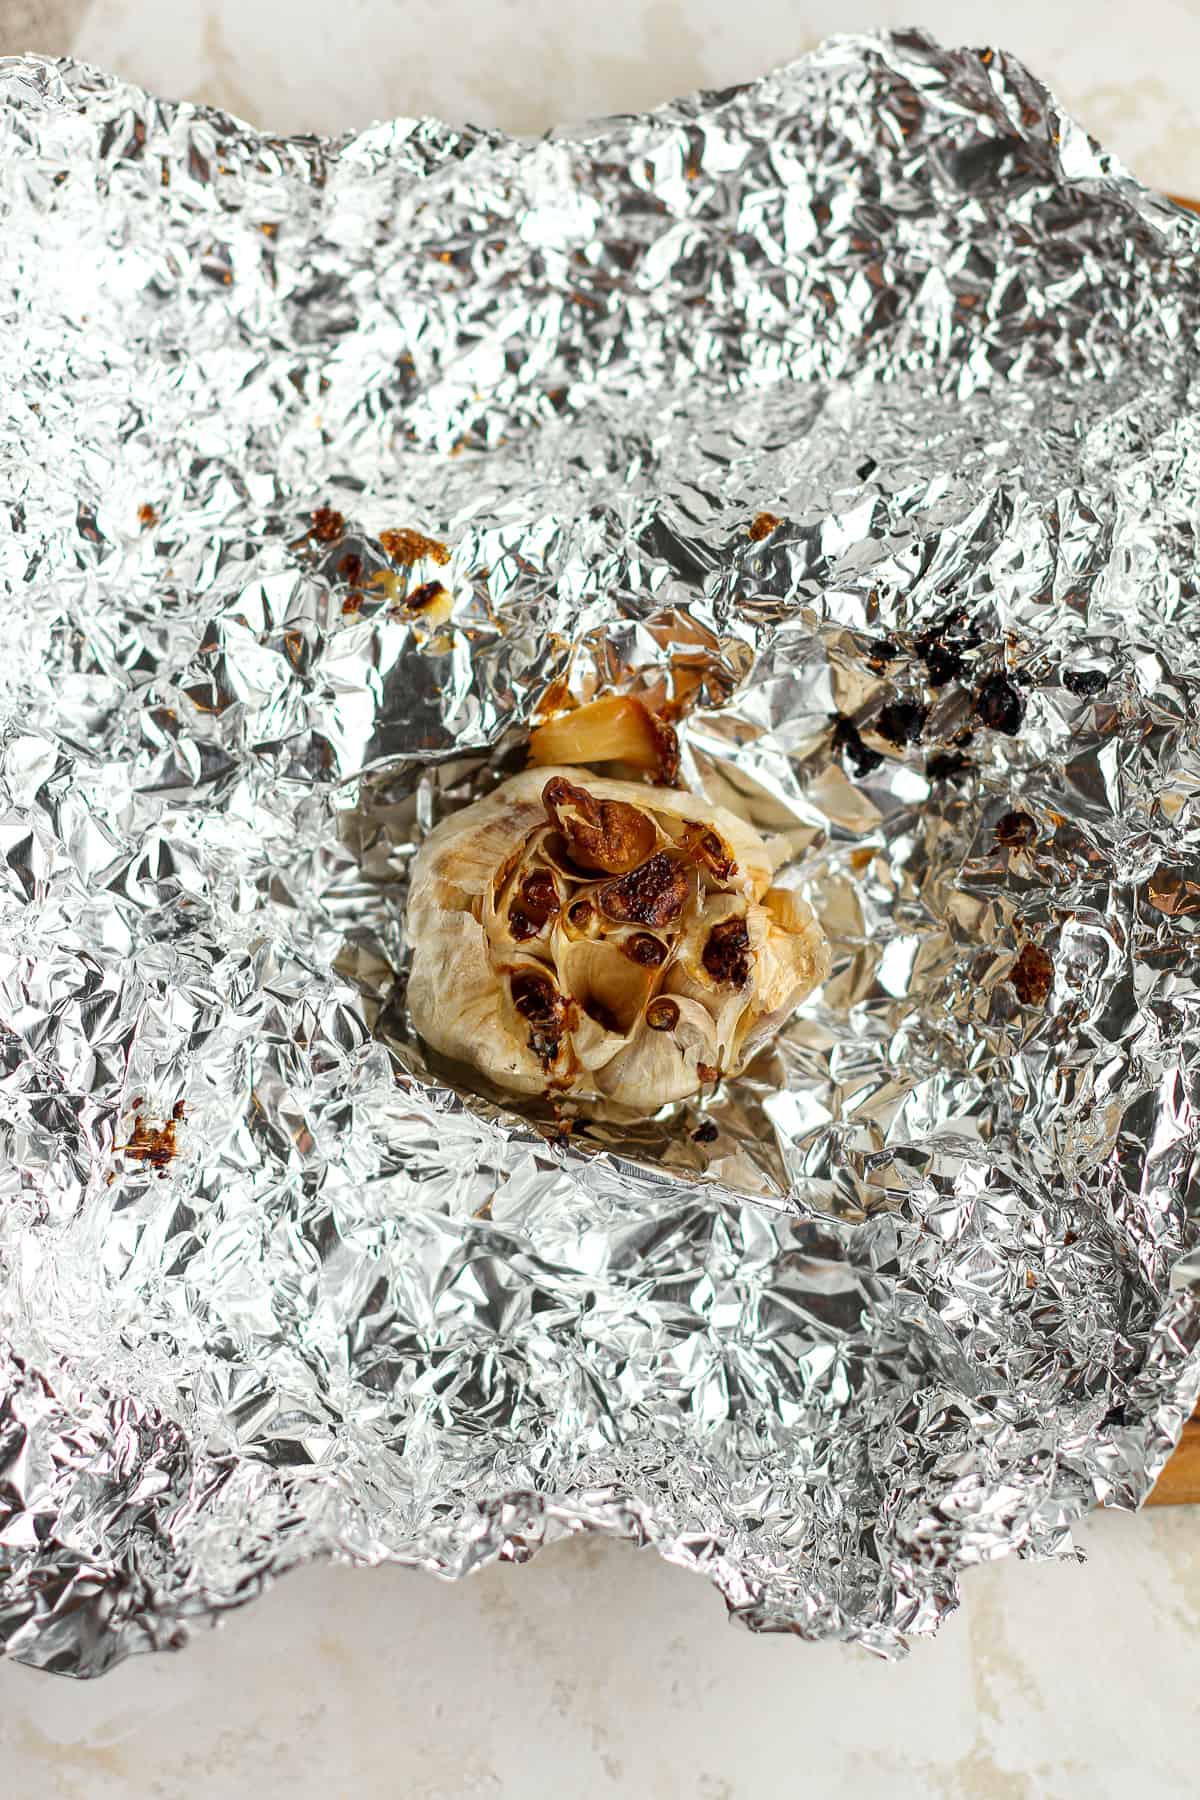 A bulb of roasted garlic on some tin foil.